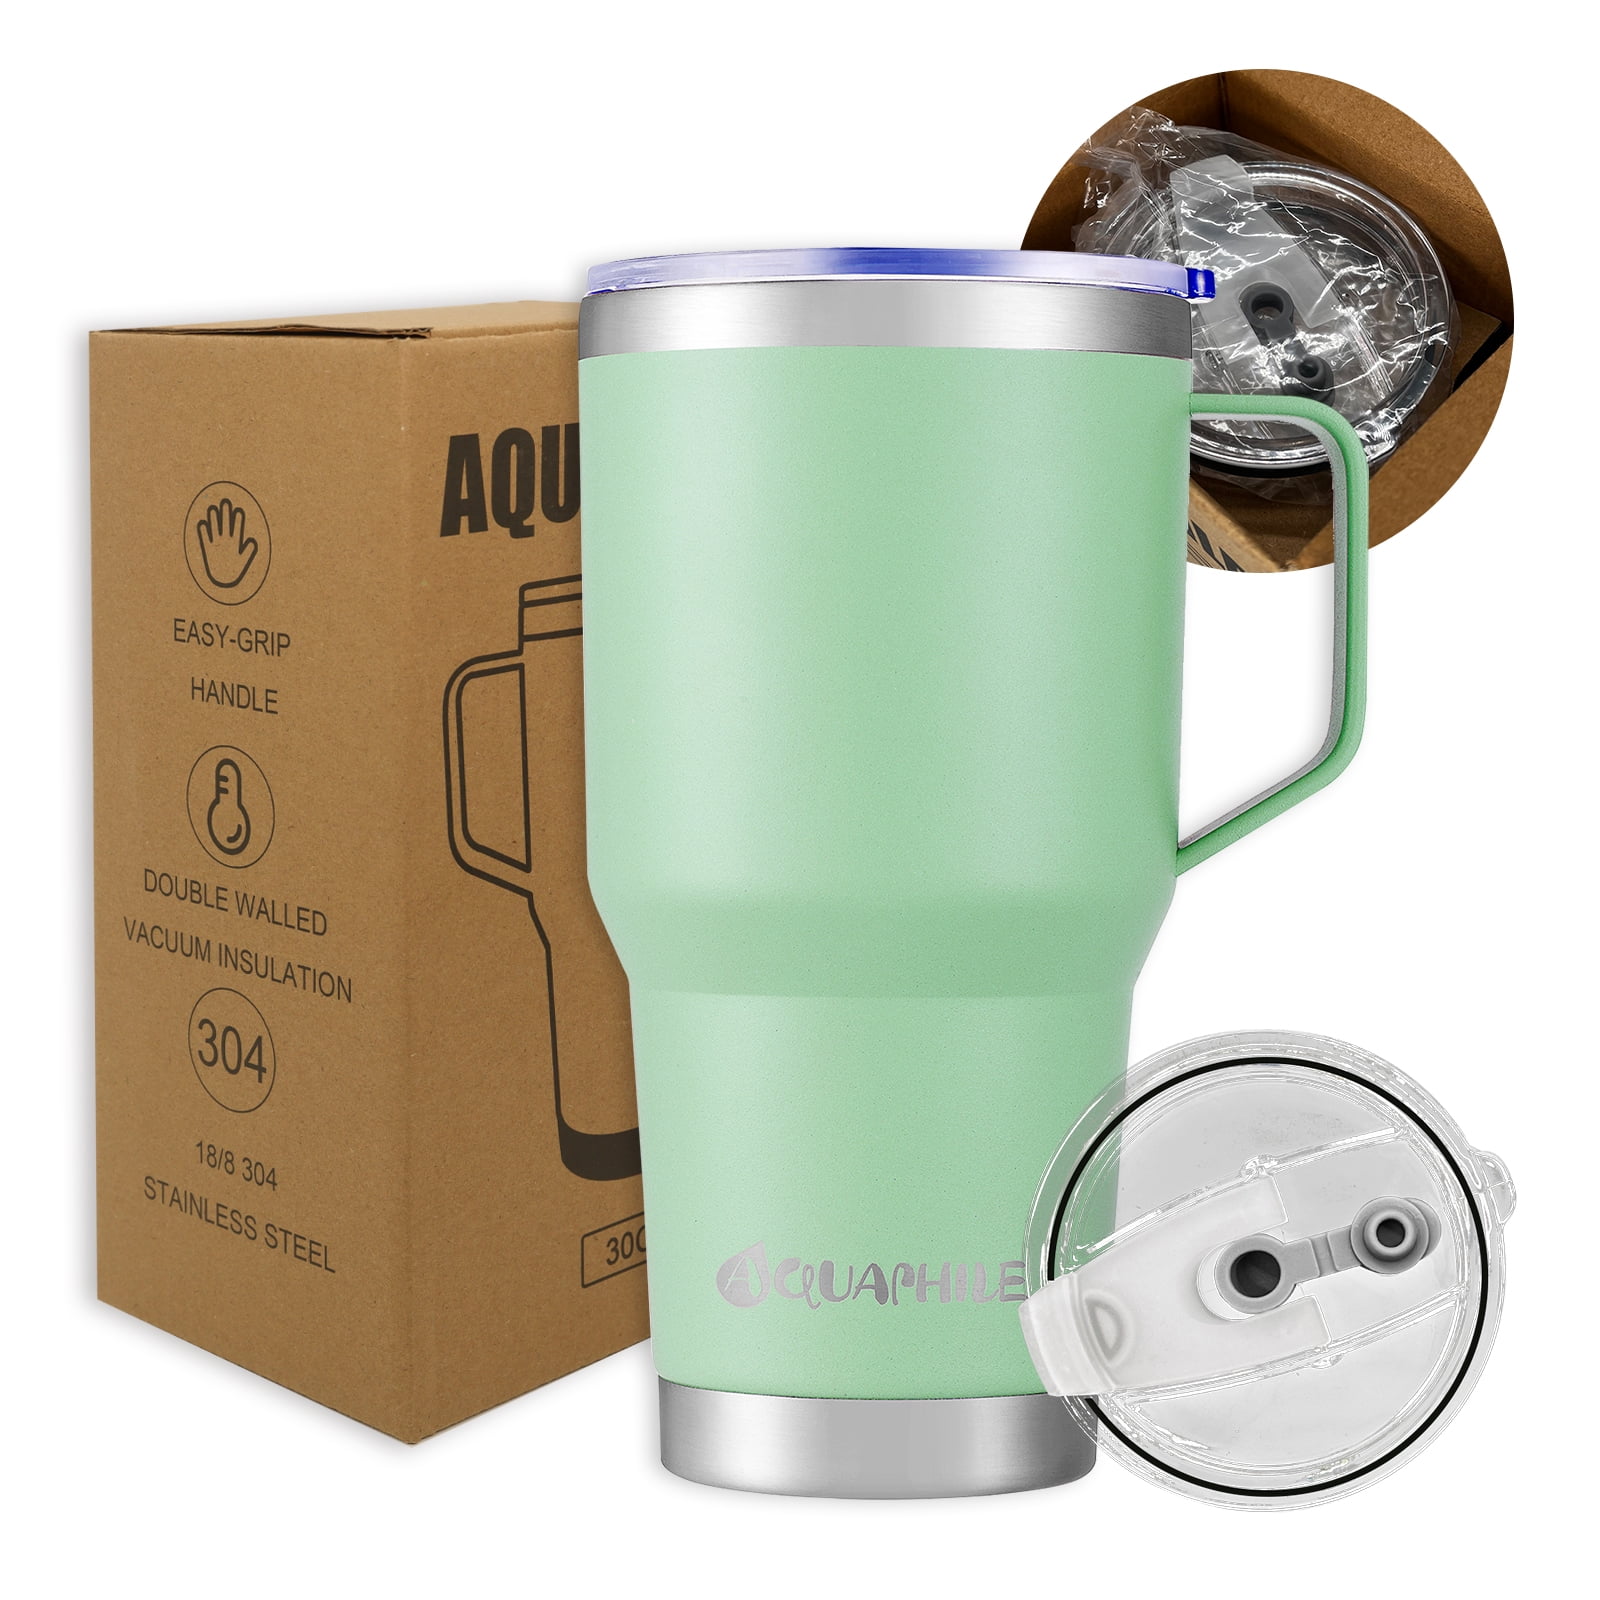 Hfyihgf Travel Mug Insulated Tumblers Cup, Upgraded Double Walled Coffee Cup, Vacuum Insulation Stainless Steel with Leakproof Lids Coffee Mug